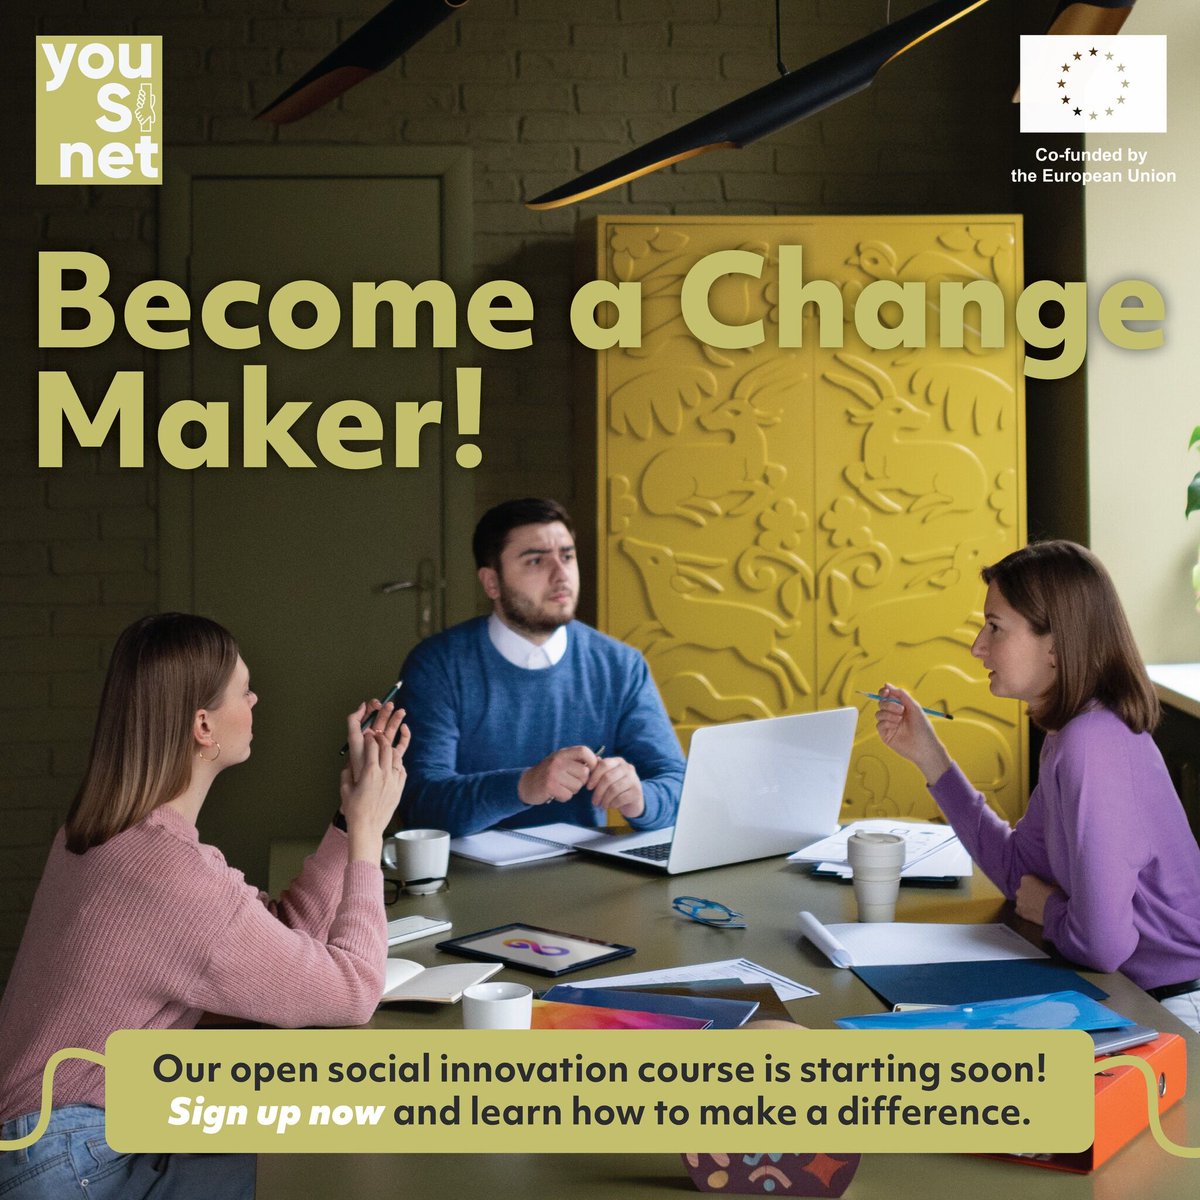 We are delighted to announce our first course where we will explore #socialinnovation and community engagement! If you're aged 18 to 34, please click on the following link to sign up on the Salto platform 👉 tinyurl.com/YSN-course01